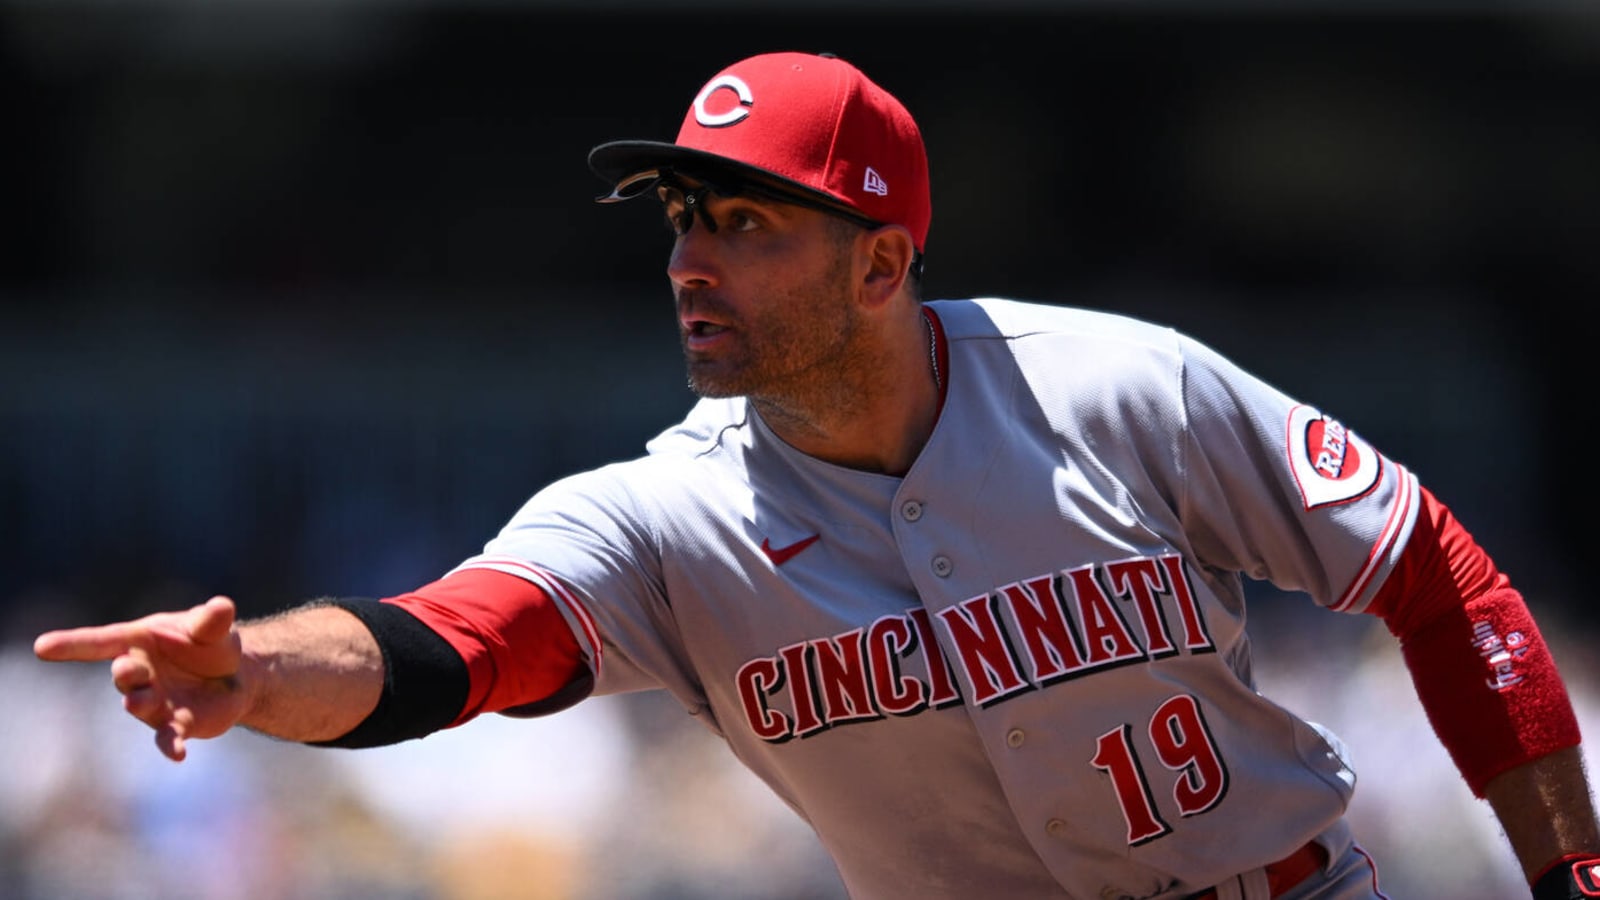 Joey Votto to return from COVID absence at Blue Jays